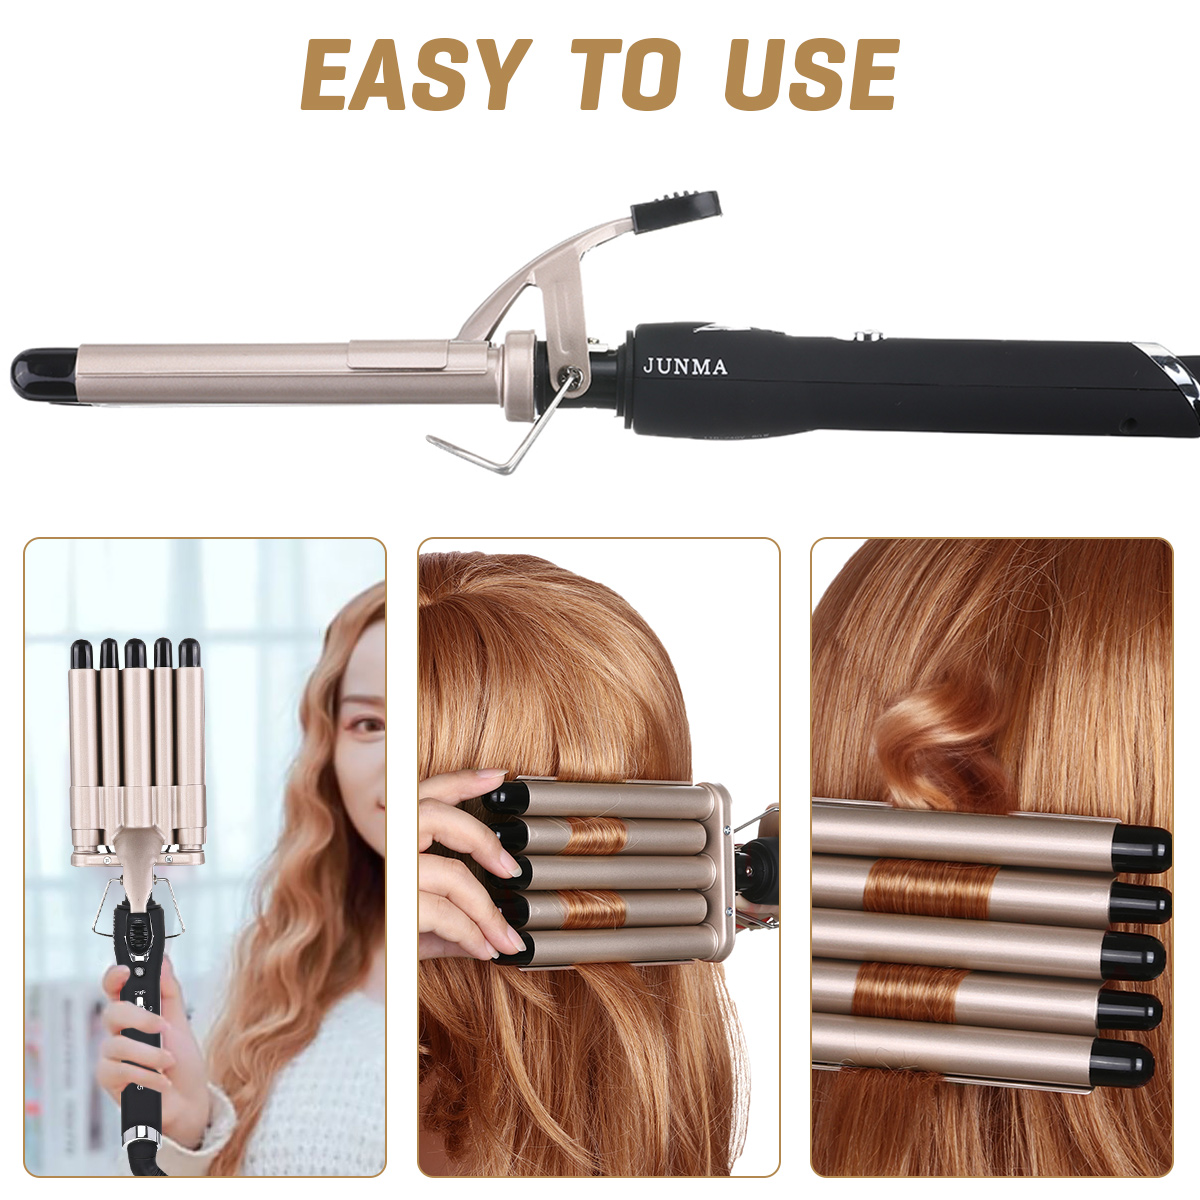 Curling Iron 5 Triple Barrels Beach Waves Curling Iron Curler Tourmaline Ceramic Wave Iron 180 C / 210 C Hair Waver 20mm Wet and Dry